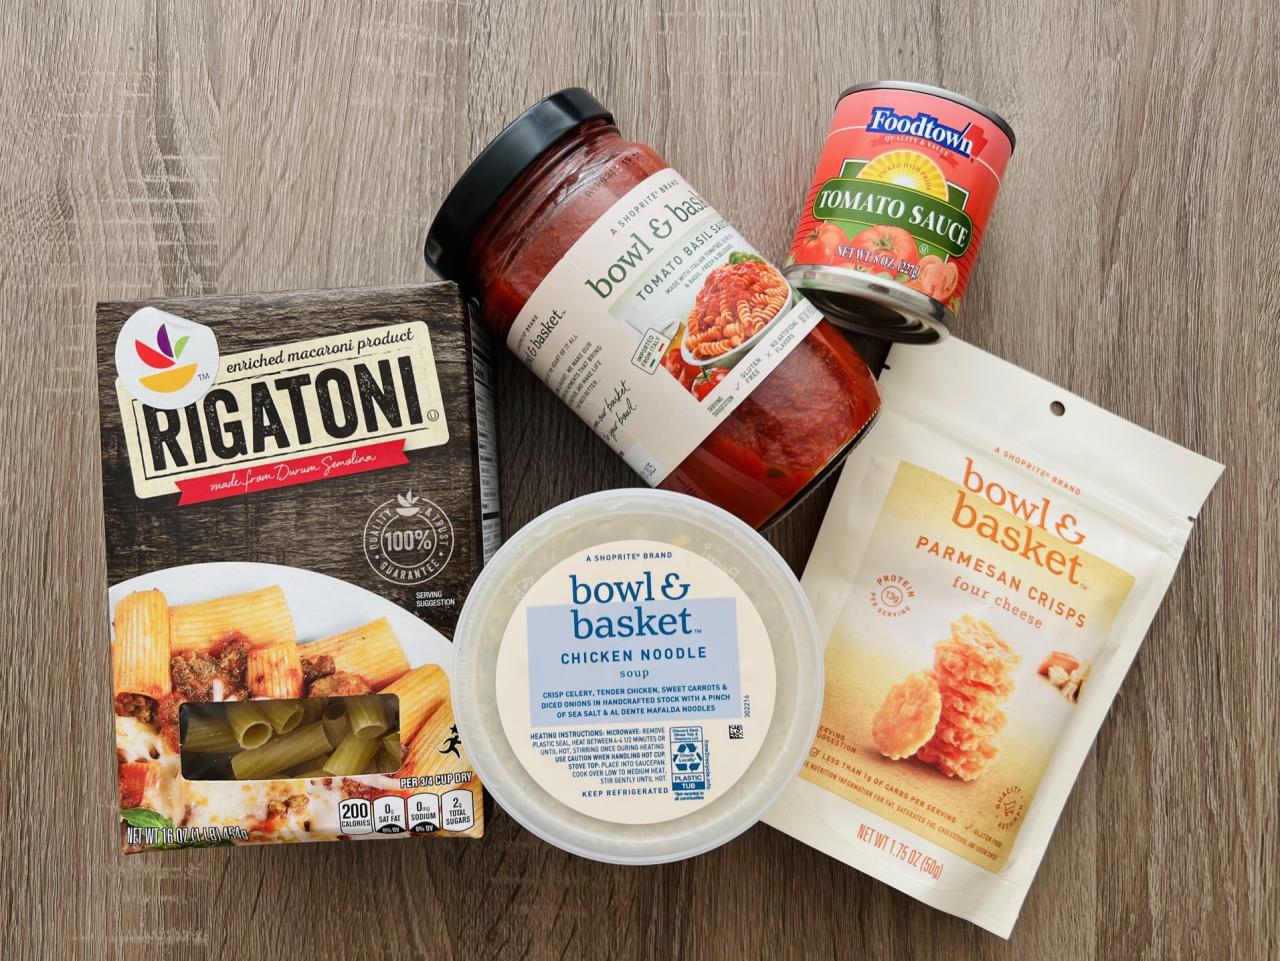 The Top 5 Condiment Trends for 2022, According to Whole Foods